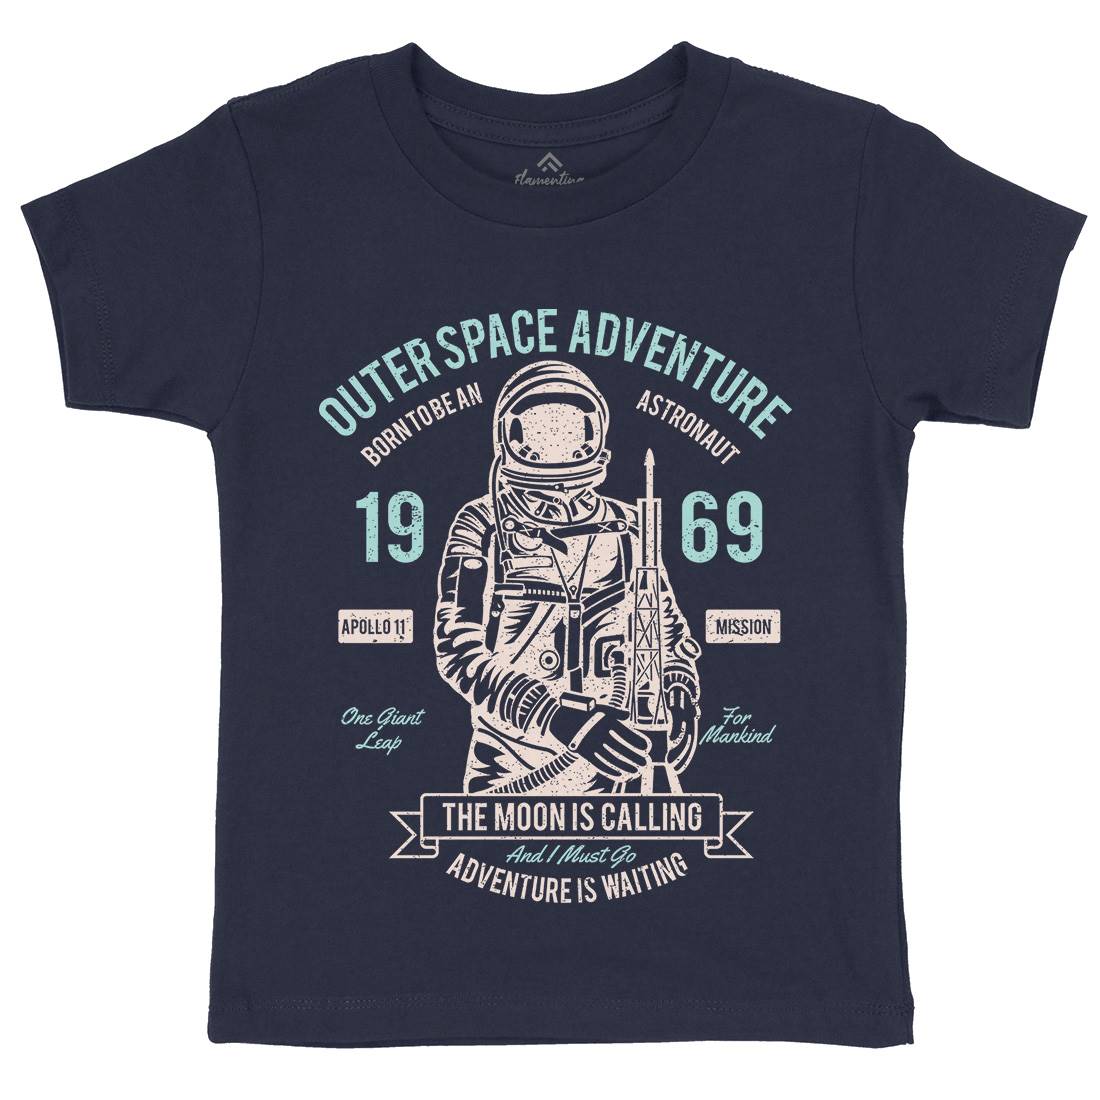 Outer Adventure 69 Kids Crew Neck T-Shirt Space A106